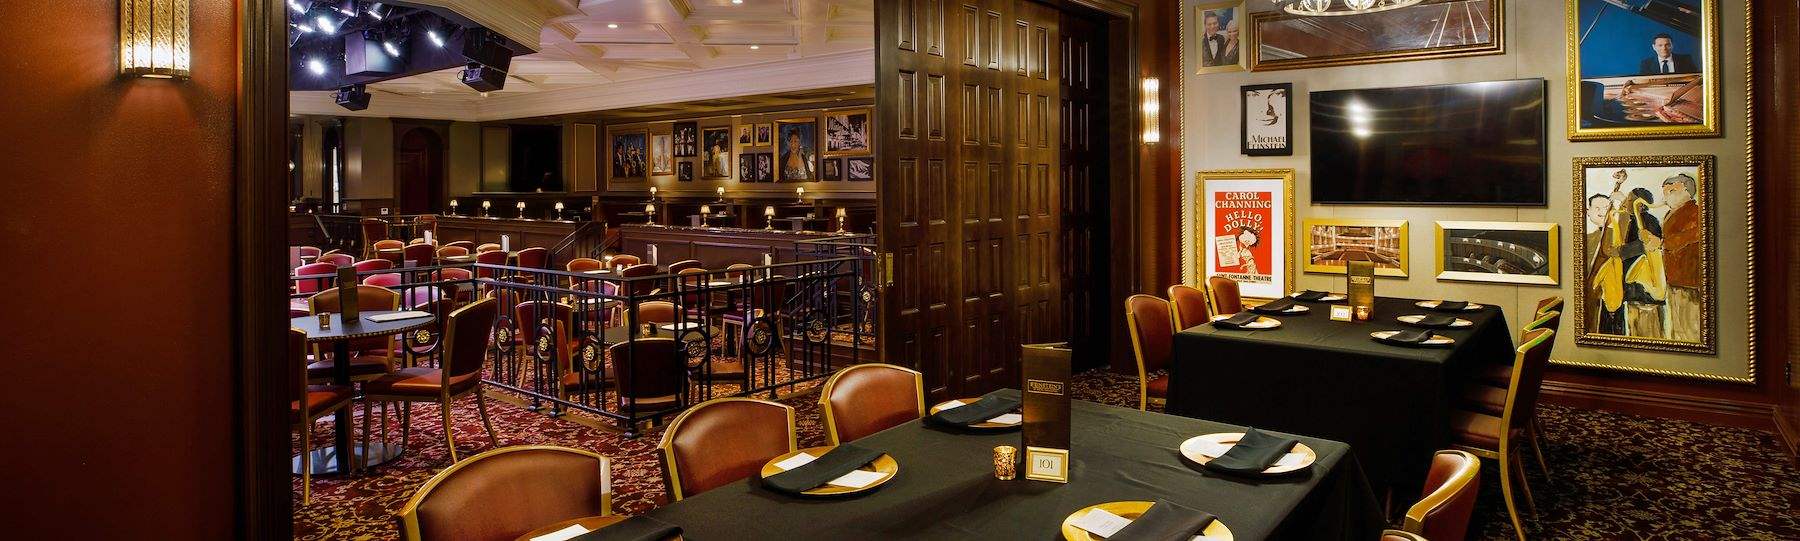 Feinstein’s at Hotel Carmichael, Carmel IN - Private Dining